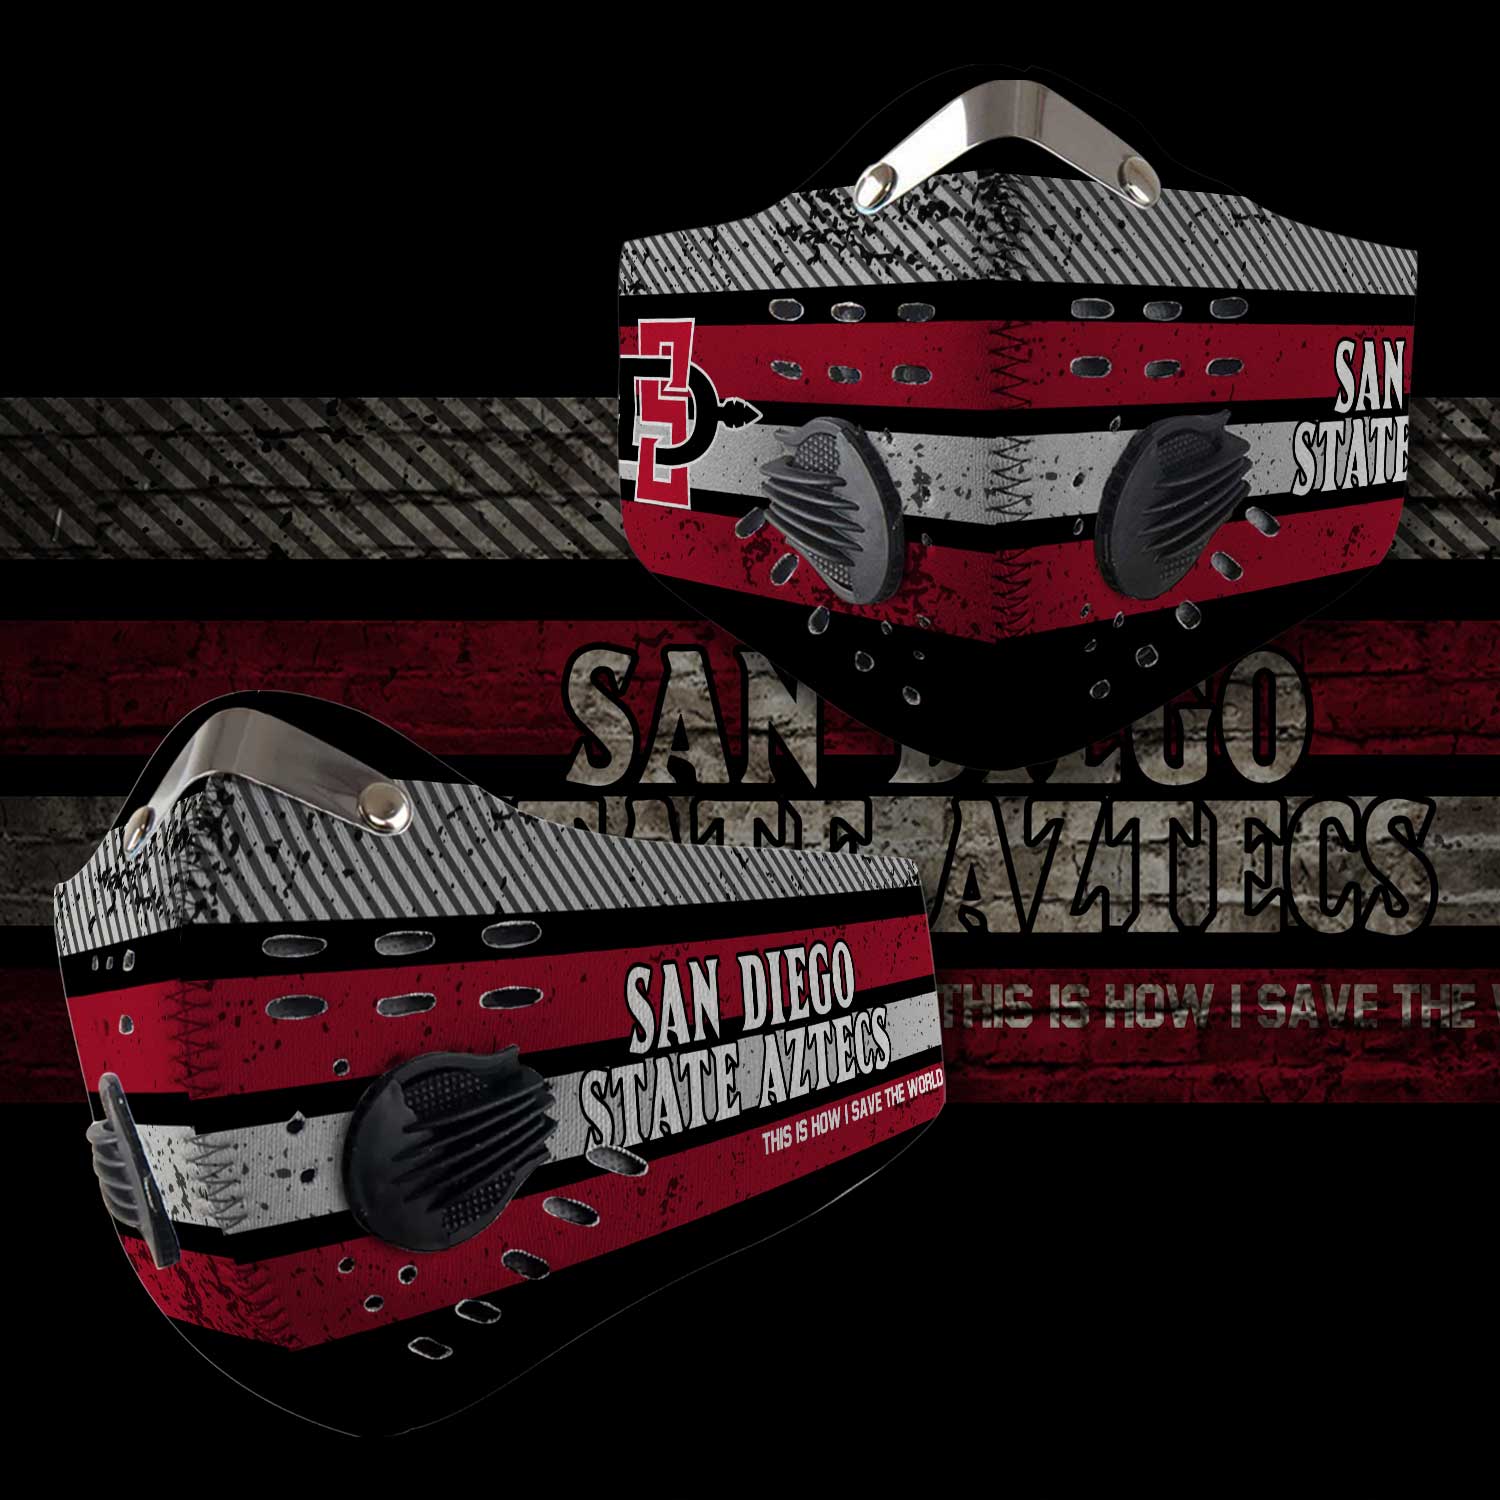 San diego state aztecs this is how i save the world face mask 2